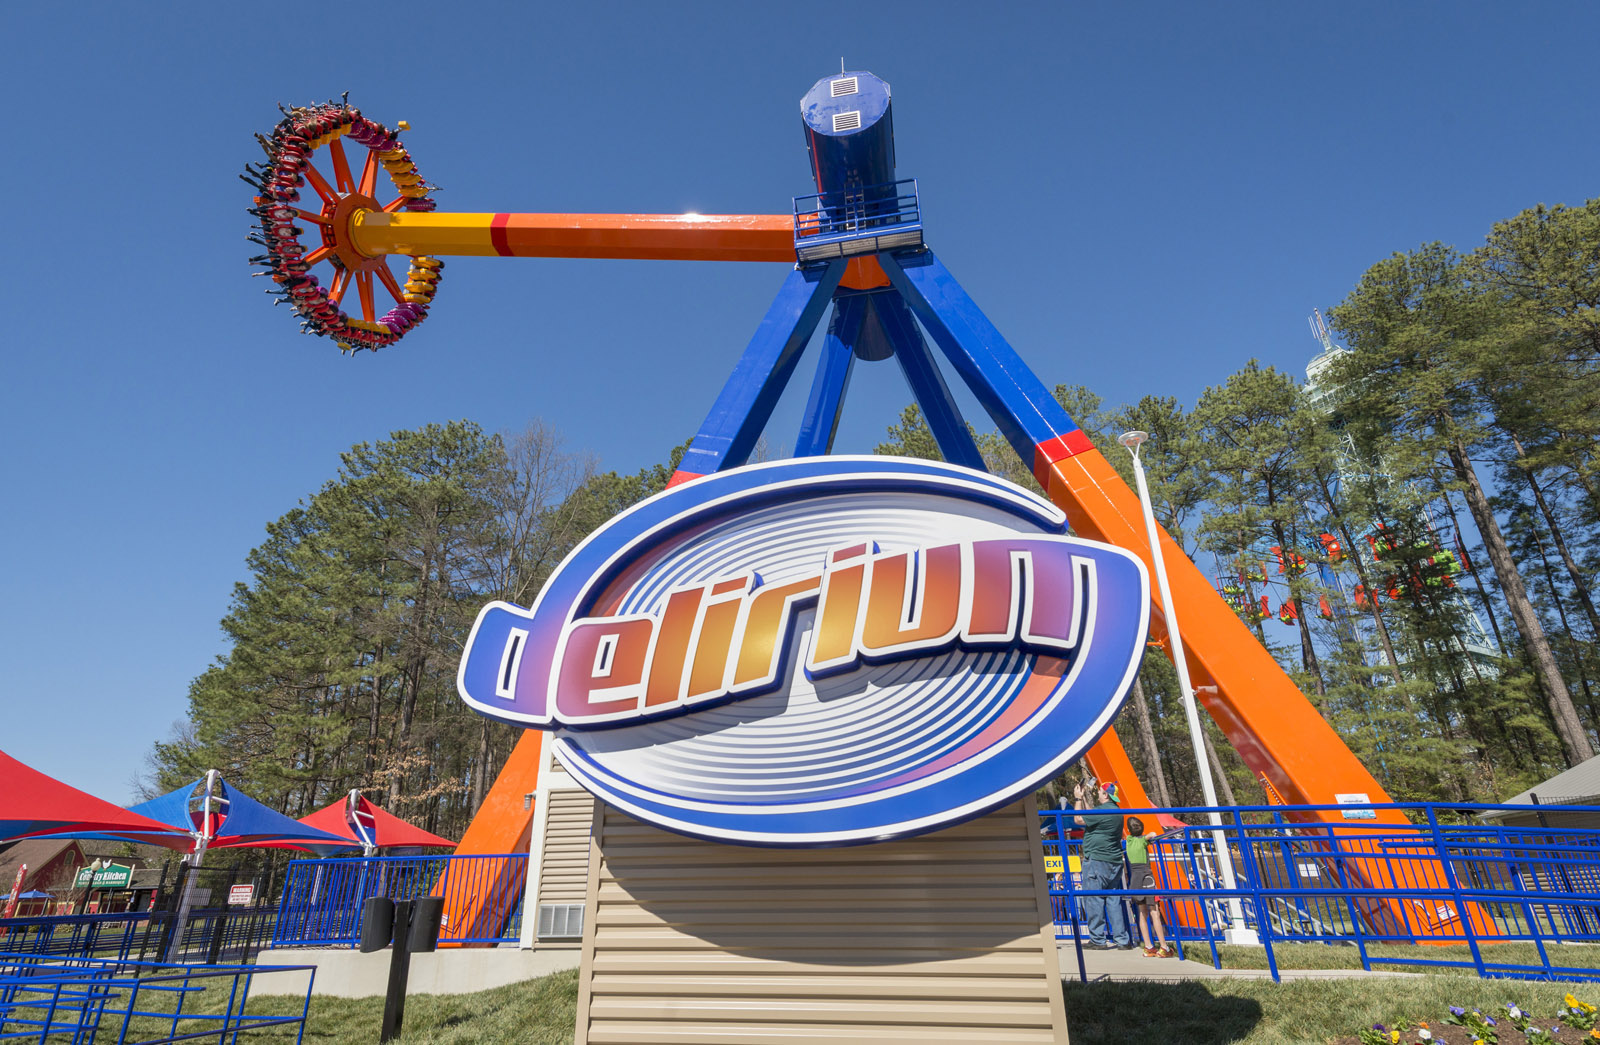 When Kings Dominion opens Friday, the Doswell amusement park will feature a new thrill ride to delight visits. Delirium sends riders spinning and soaring through the park's Candy Apple Grove section. (Courtesy PRNewsFoto/Kings Dominion)